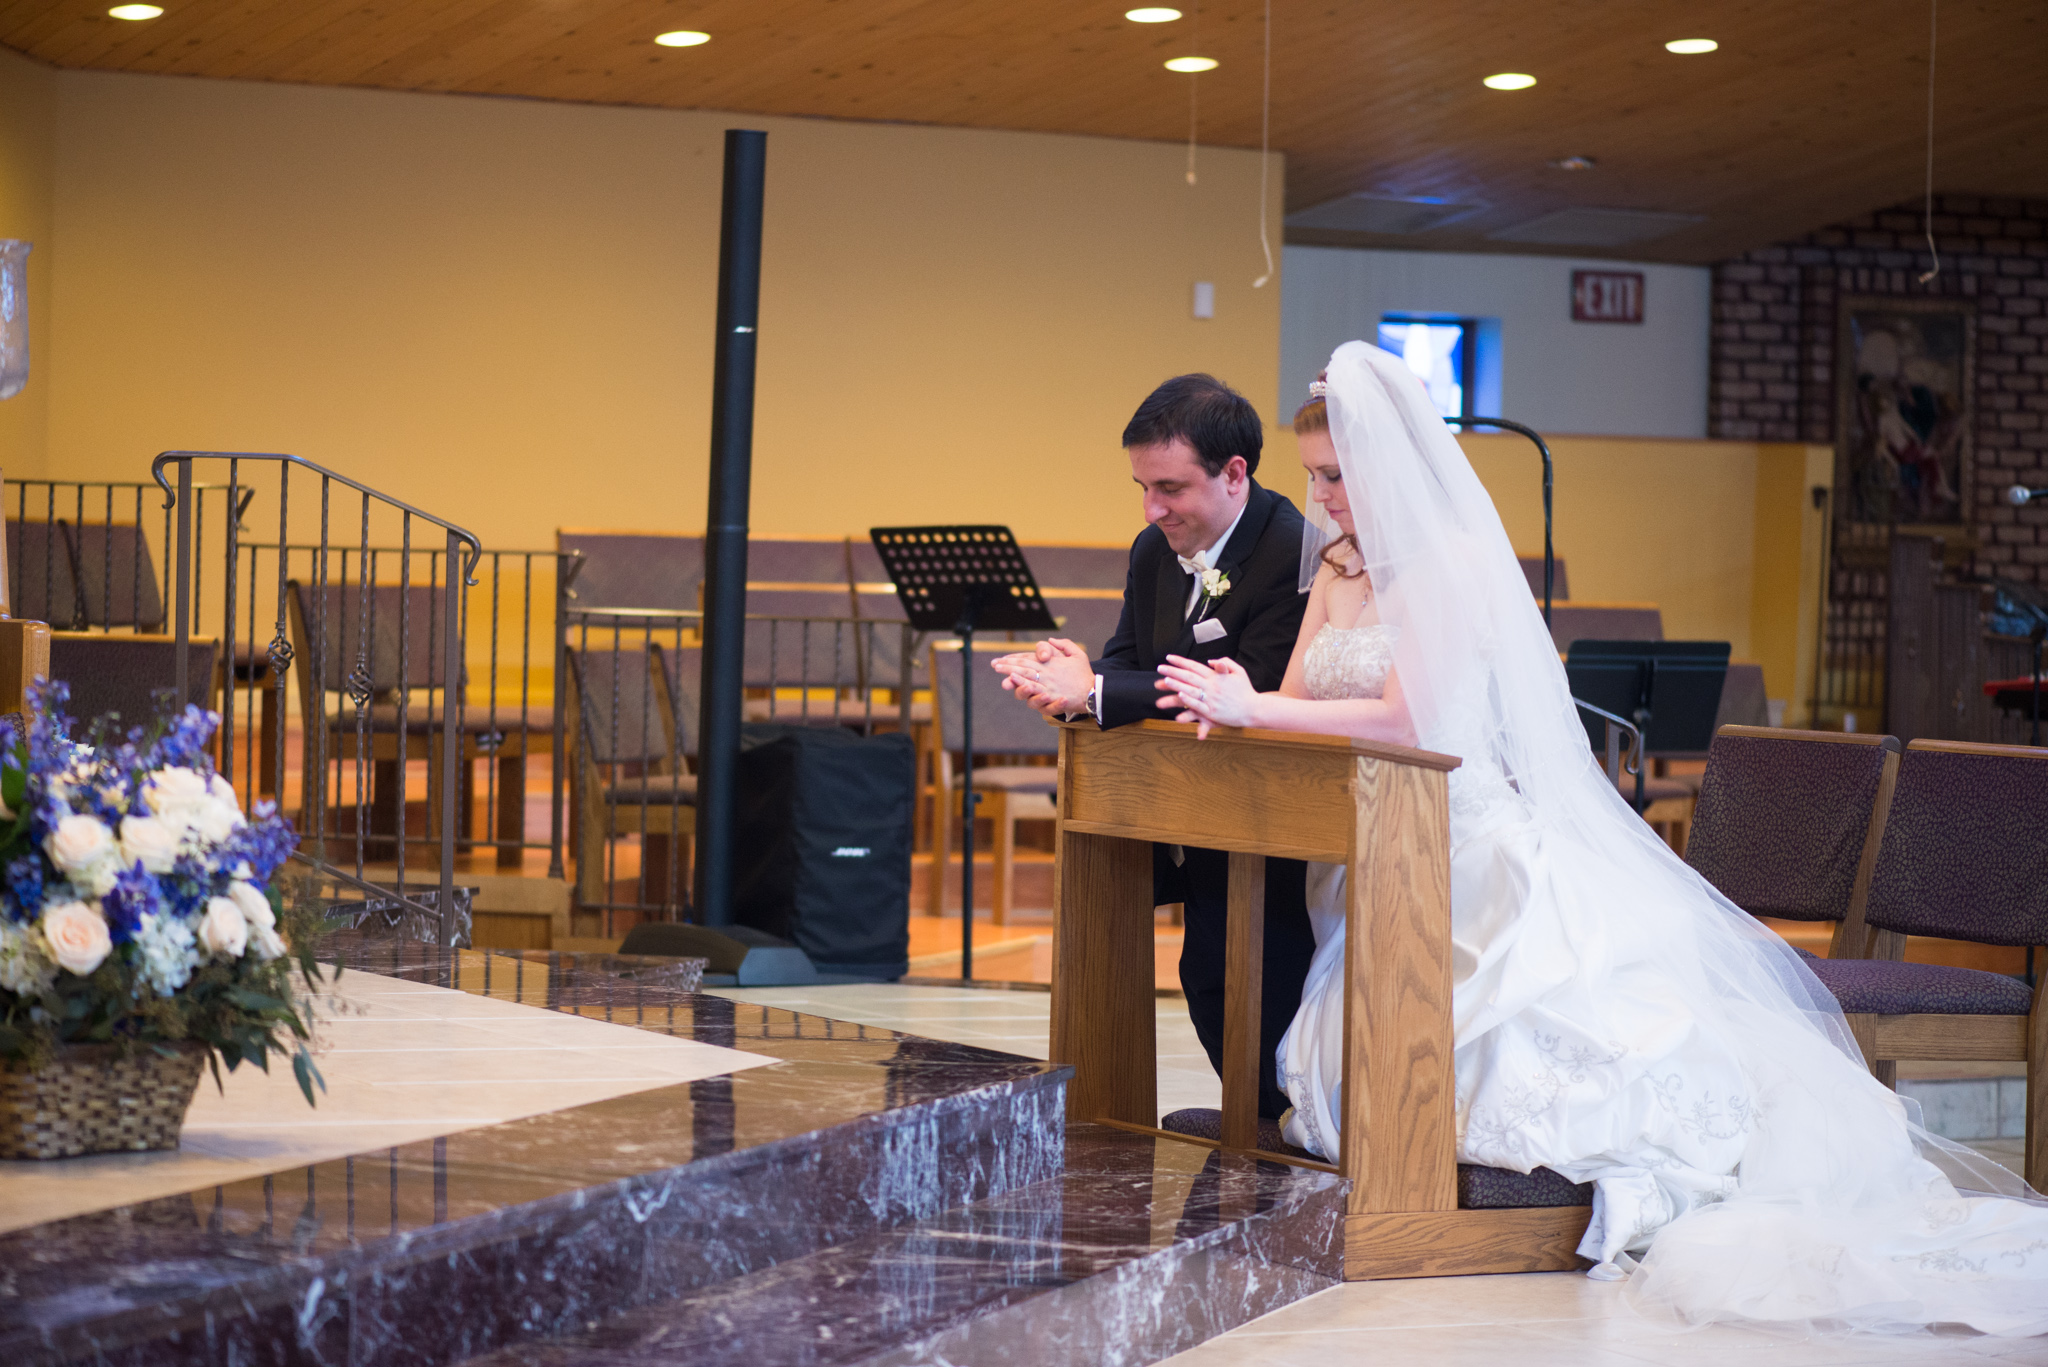 Our Lady of Hope St. Mary's Church Blackwood New Jersey Wedding Ceremony photo